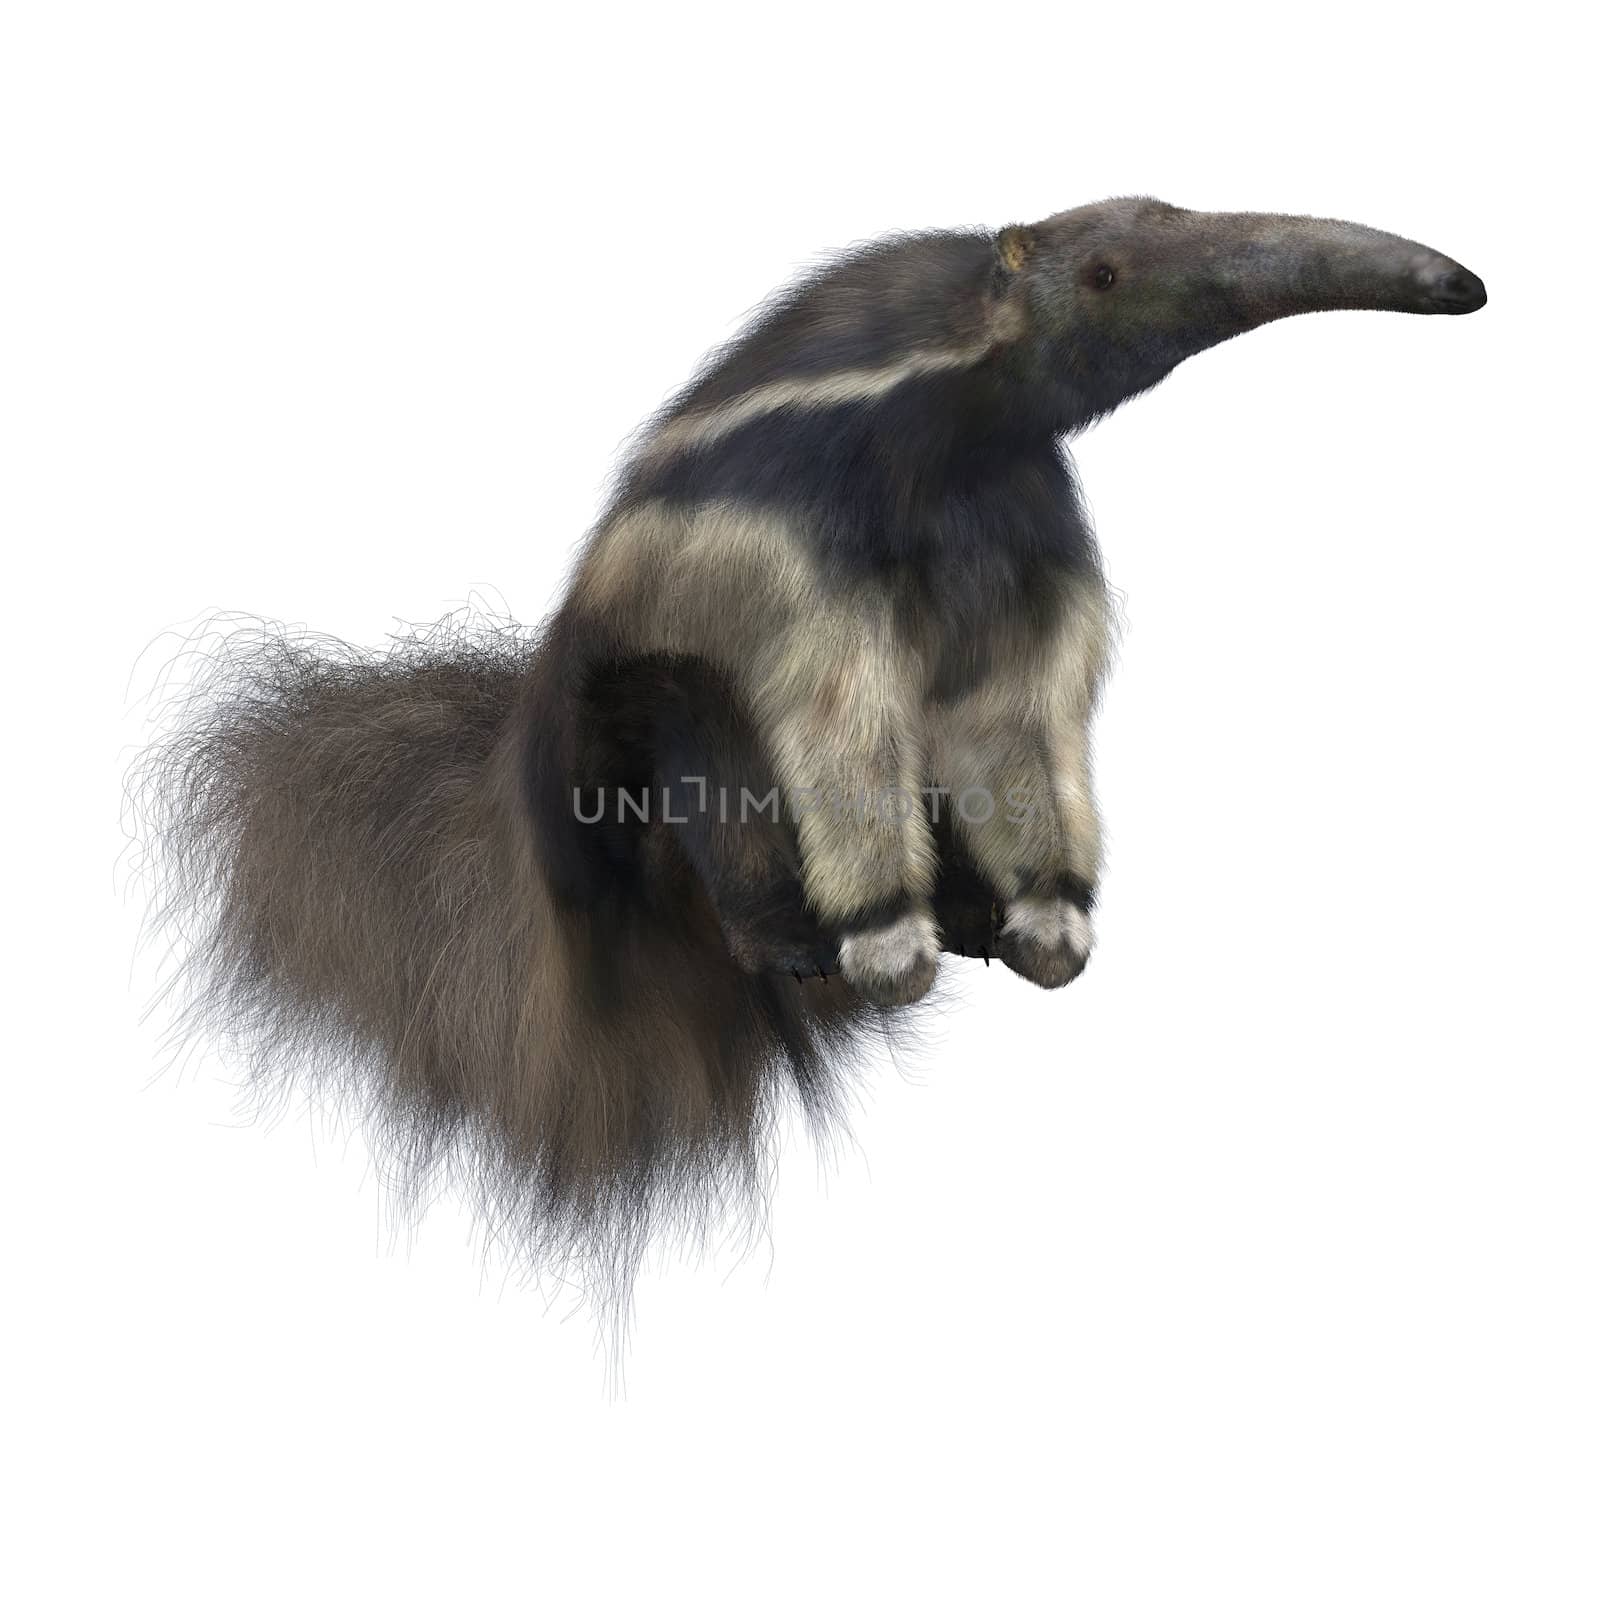 3D digital render of an amazing animal giant anteater isolated on white background